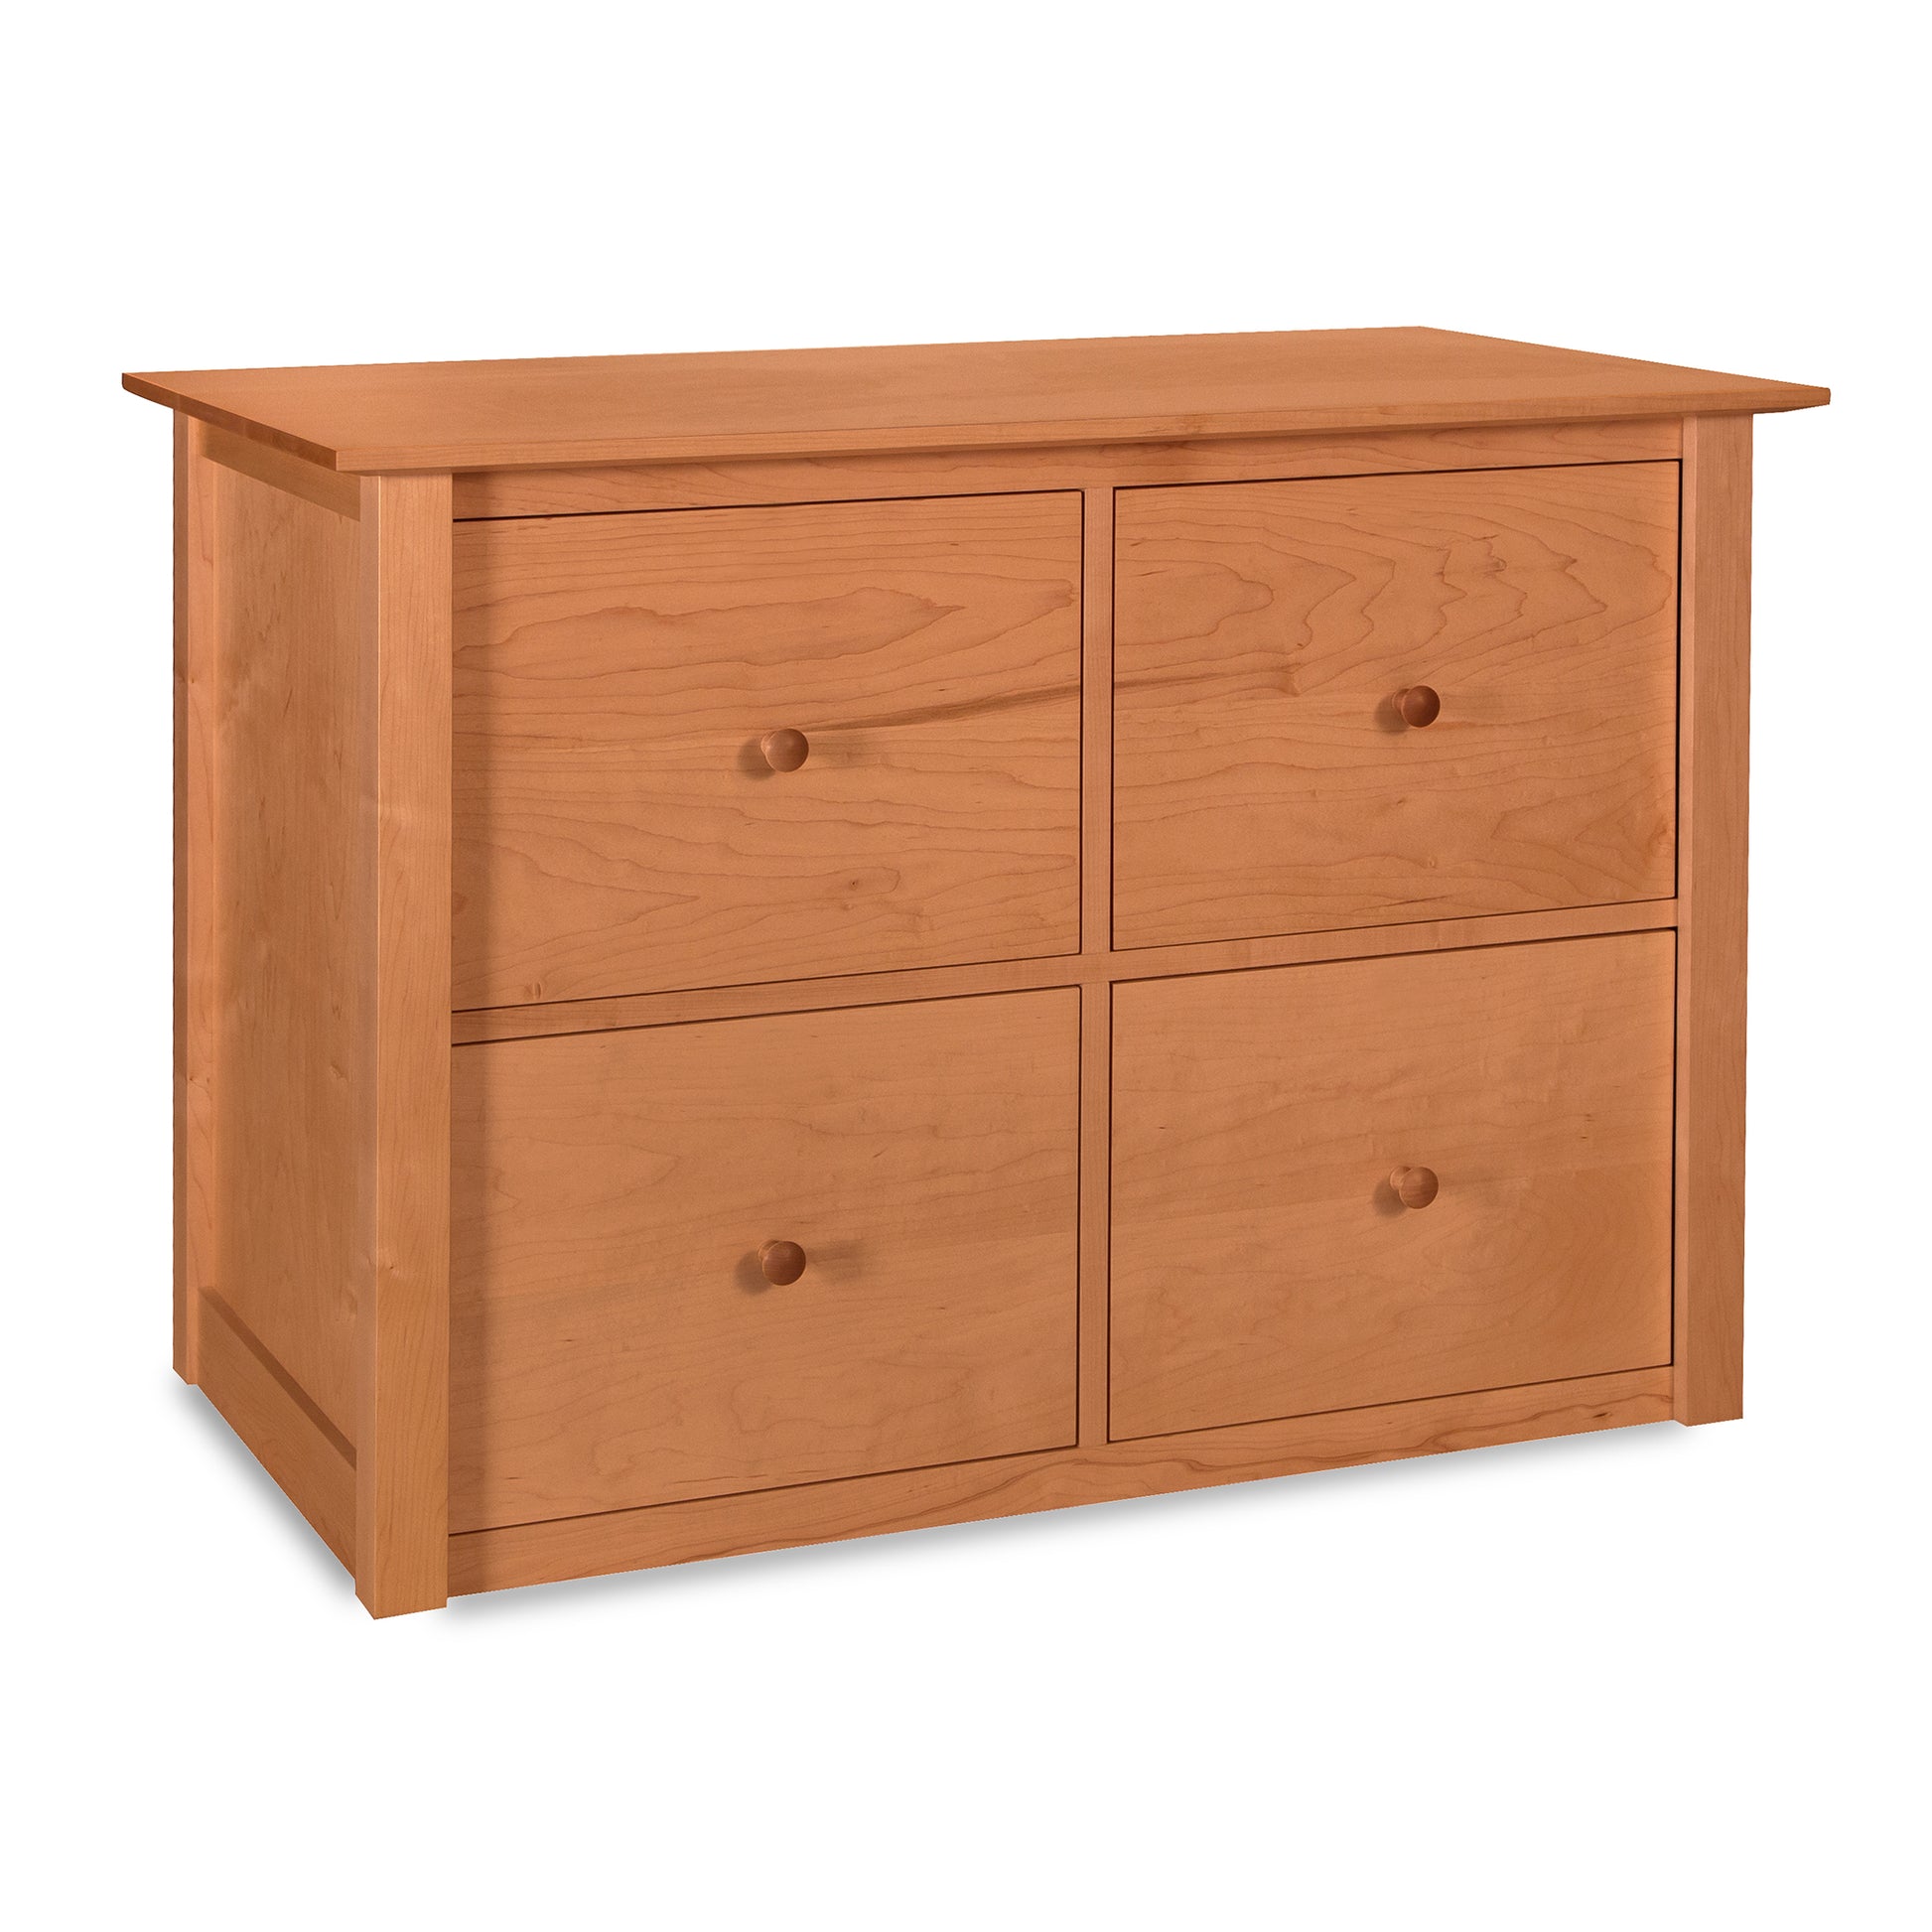 A wooden American Shaker 4-Drawer File Credenza with round knobs from Maple Corner Woodworks, isolated on a white background.